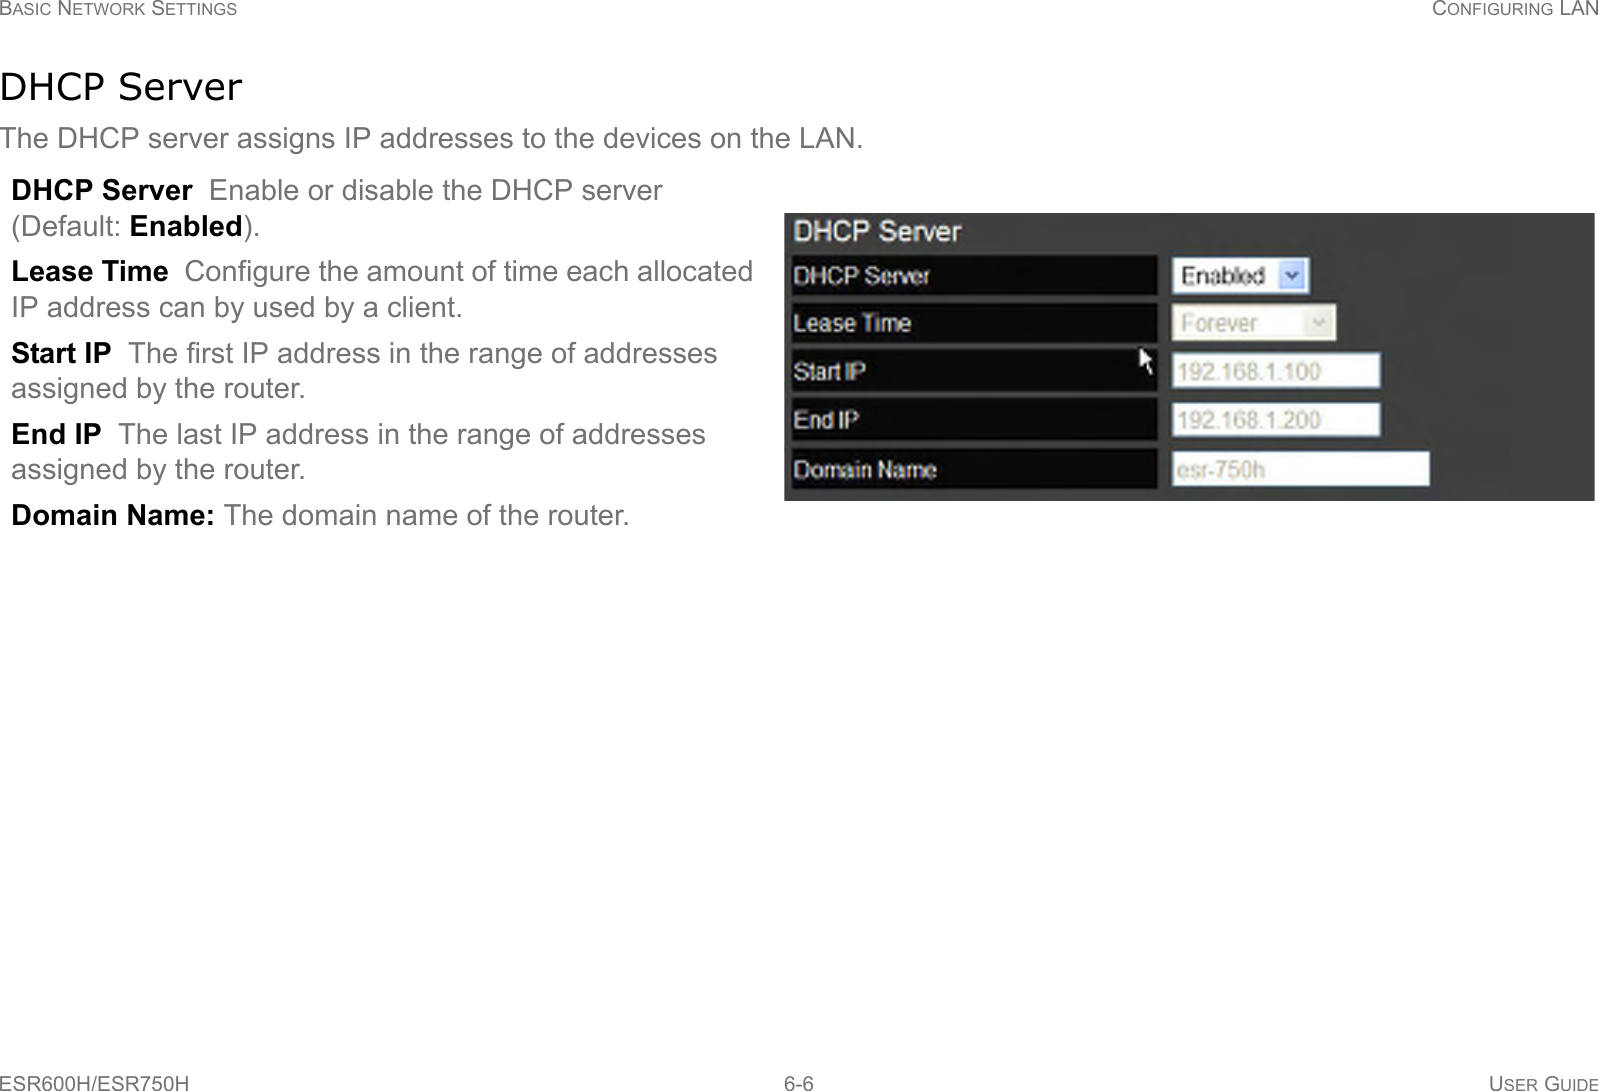 BASIC NETWORK SETTINGS CONFIGURING LANESR600H/ESR750H 6-6 USER GUIDEDHCP ServerThe DHCP server assigns IP addresses to the devices on the LAN.DHCP Server  Enable or disable the DHCP server (Default: Enabled).Lease Time  Configure the amount of time each allocated IP address can by used by a client.Start IP  The first IP address in the range of addresses assigned by the router.End IP  The last IP address in the range of addresses assigned by the router.Domain Name: The domain name of the router.